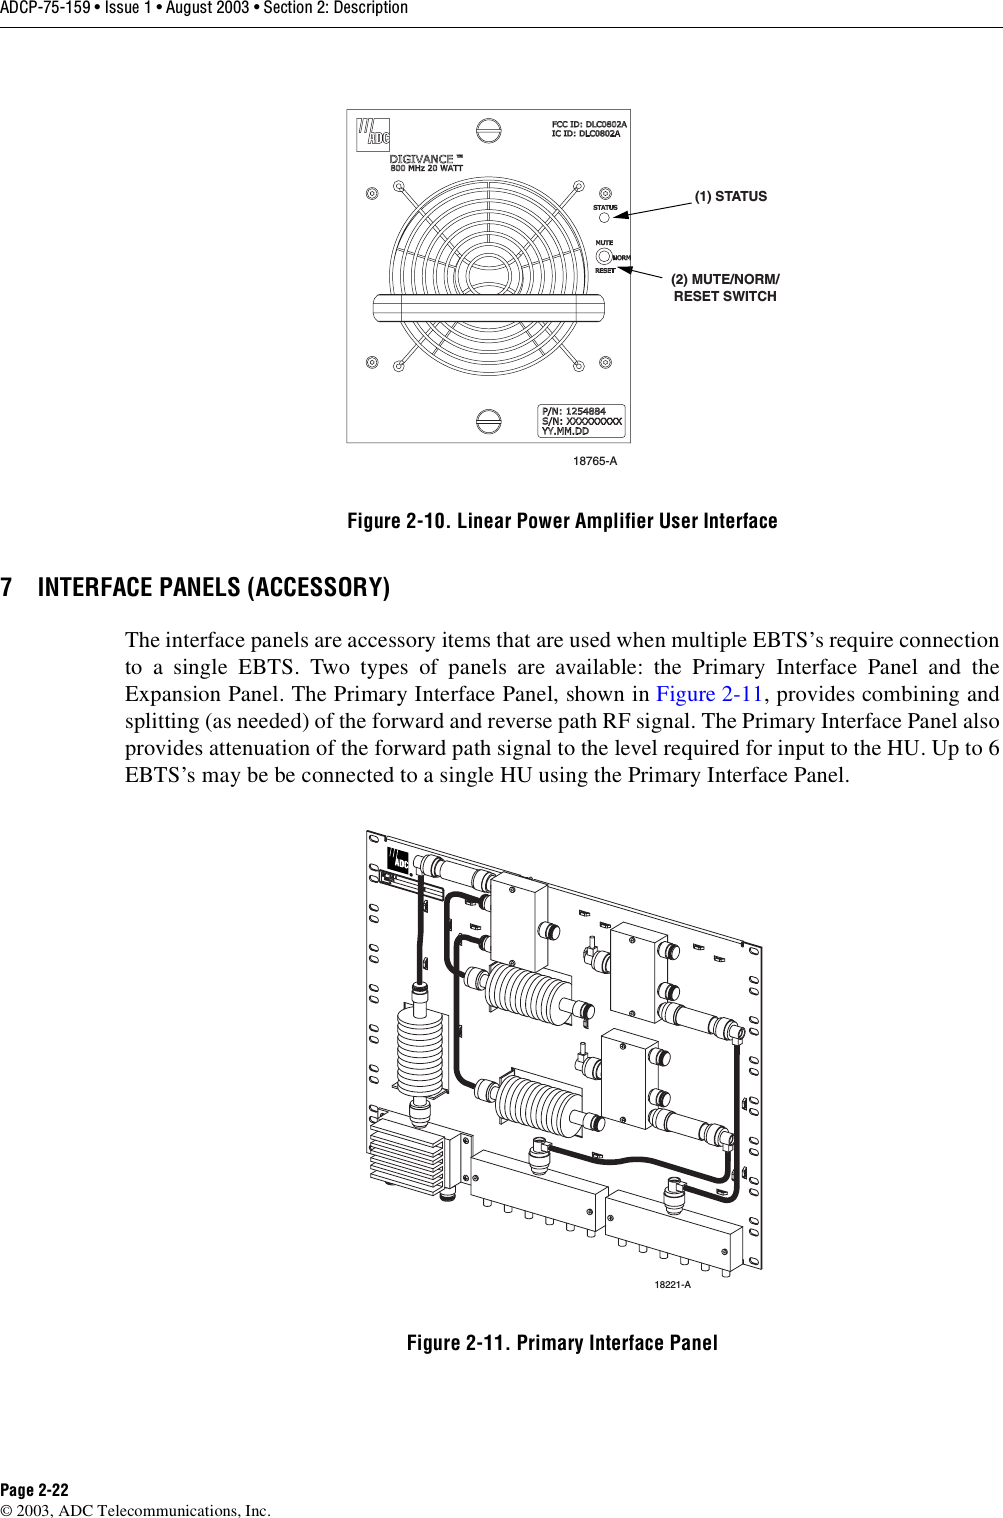 ADCP-75-159 • Issue 1 • August 2003 • Section 2: DescriptionPage 2-22© 2003, ADC Telecommunications, Inc.Figure 2-10. Linear Power Amplifier User Interface7 INTERFACE PANELS (ACCESSORY)The interface panels are accessory items that are used when multiple EBTS’s require connectionto a single EBTS. Two types of panels are available: the Primary Interface Panel and theExpansion Panel. The Primary Interface Panel, shown in Figure 2-11, provides combining andsplitting (as needed) of the forward and reverse path RF signal. The Primary Interface Panel alsoprovides attenuation of the forward path signal to the level required for input to the HU. Up to 6EBTS’s may be be connected to a single HU using the Primary Interface Panel.  Figure 2-11. Primary Interface Panel18765-A(1) STATUS(2) MUTE/NORM/RESET SWITCH18221-A